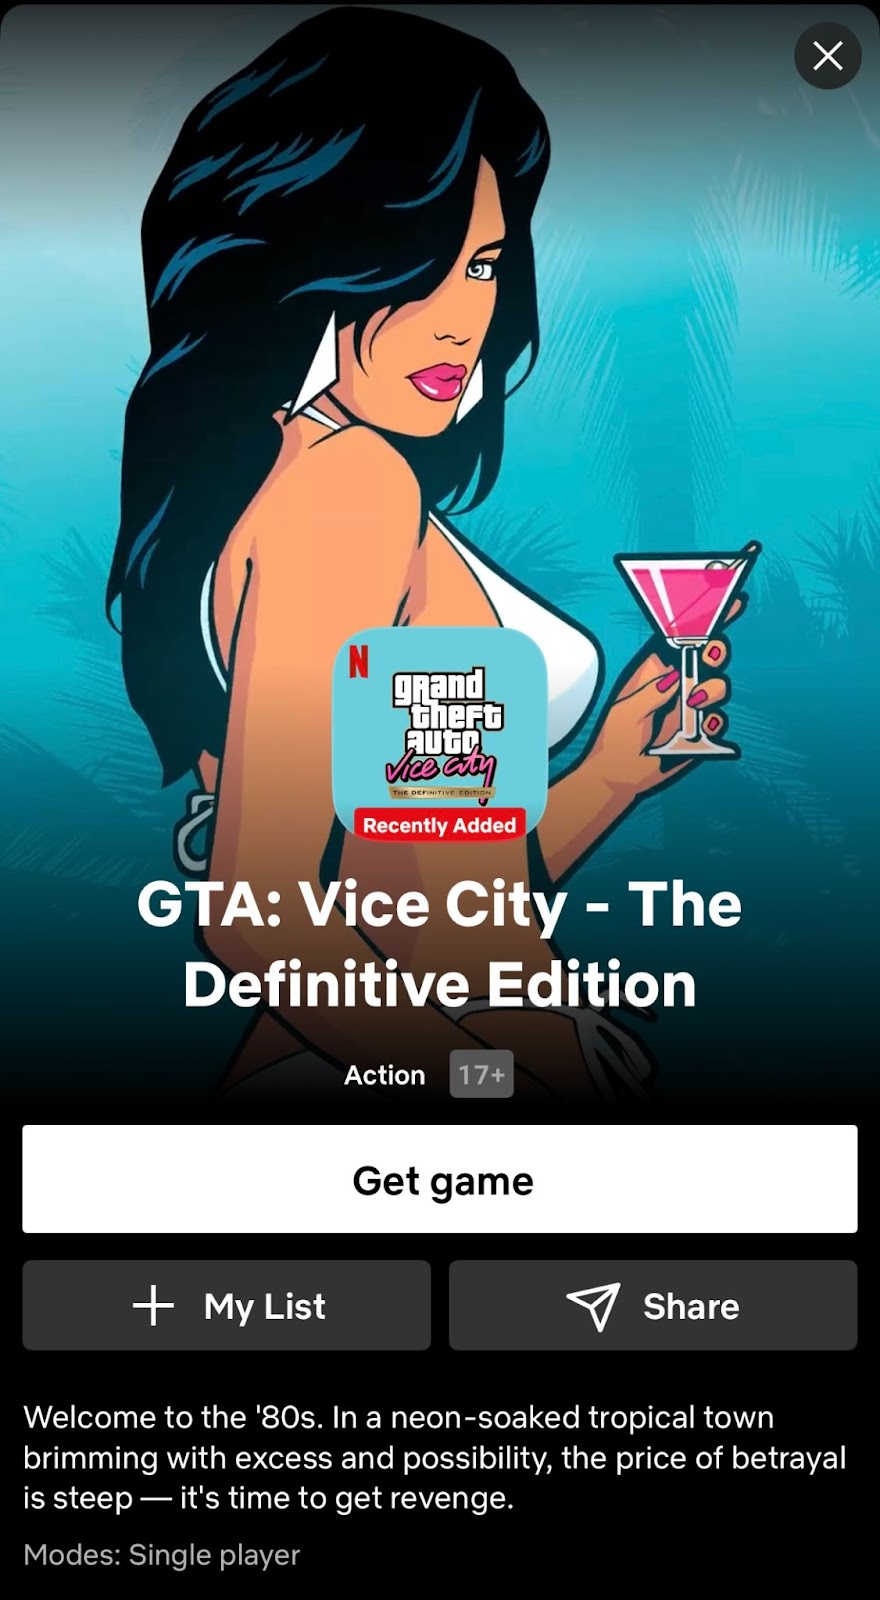 GTA DEFINITIVE EDITION IS HERE  HOW TO PLAY FOR FREE - IS IT WORTH TO BUY  NETFLIX ?? - DOWNLOAD 💥😍 